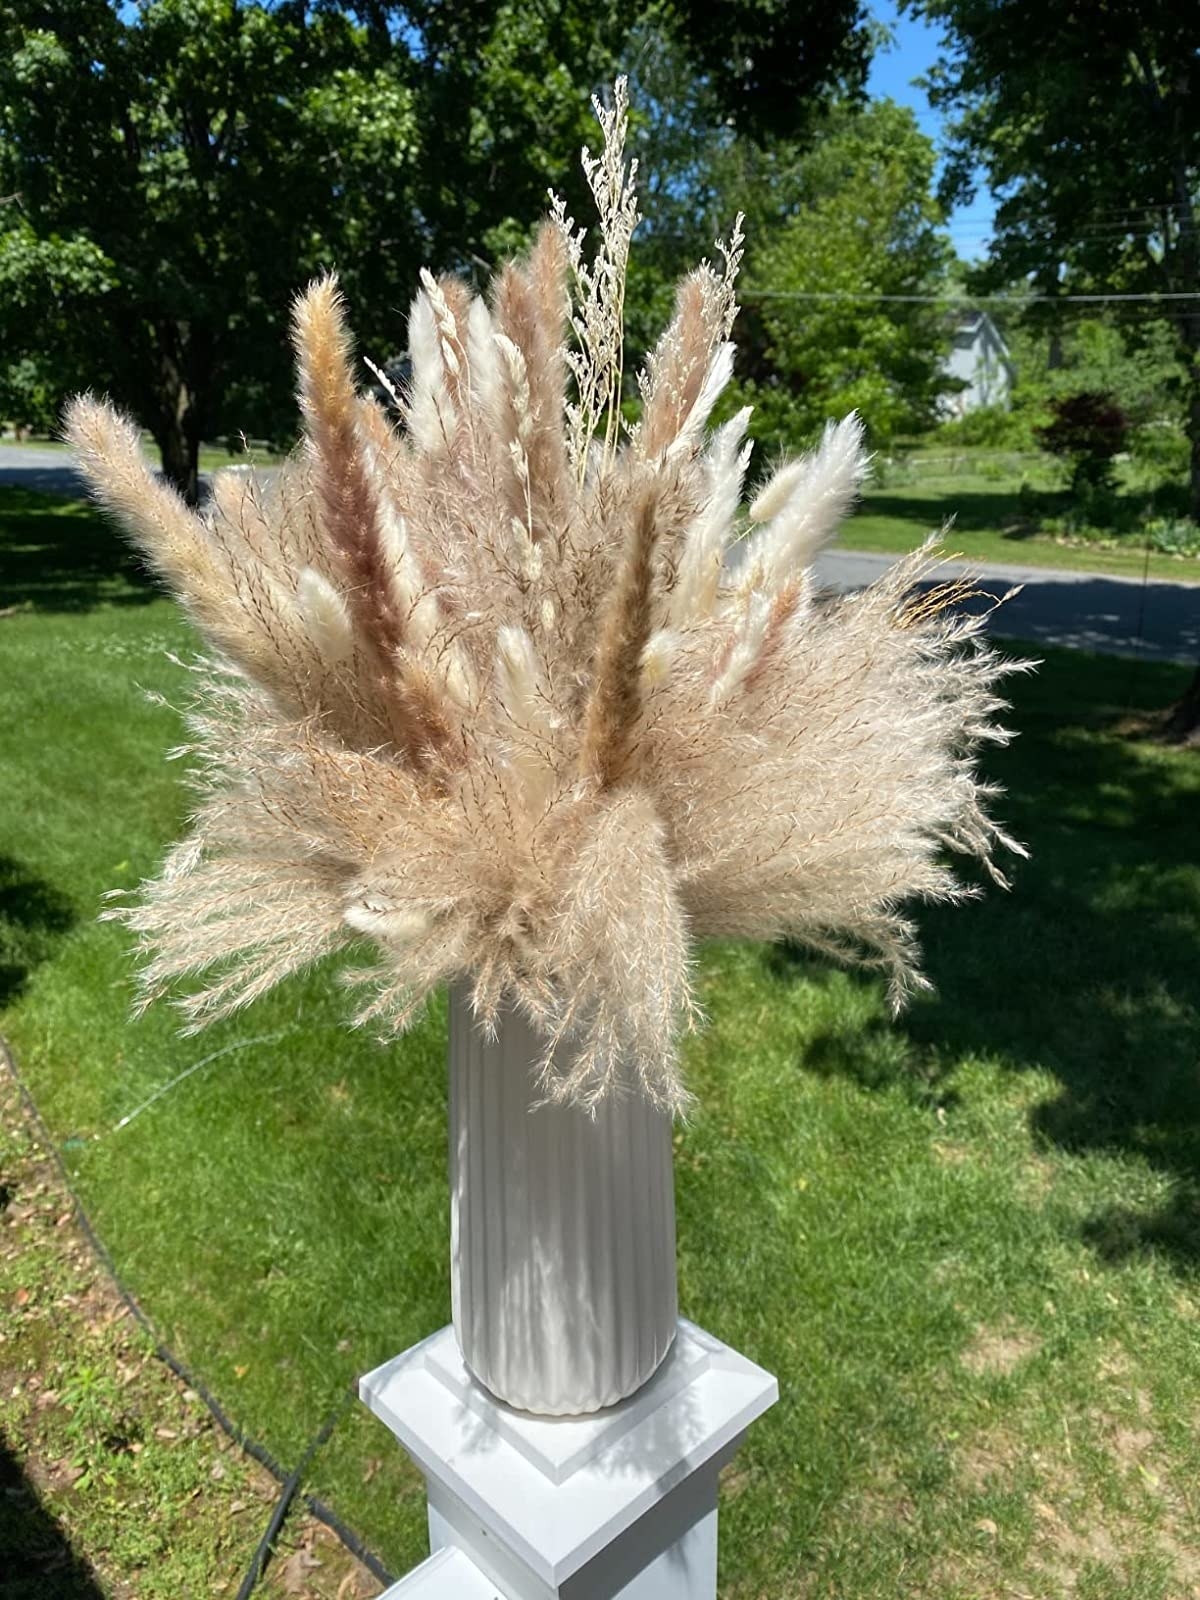 Reviewer image of pampas grass bunch in a vase outside